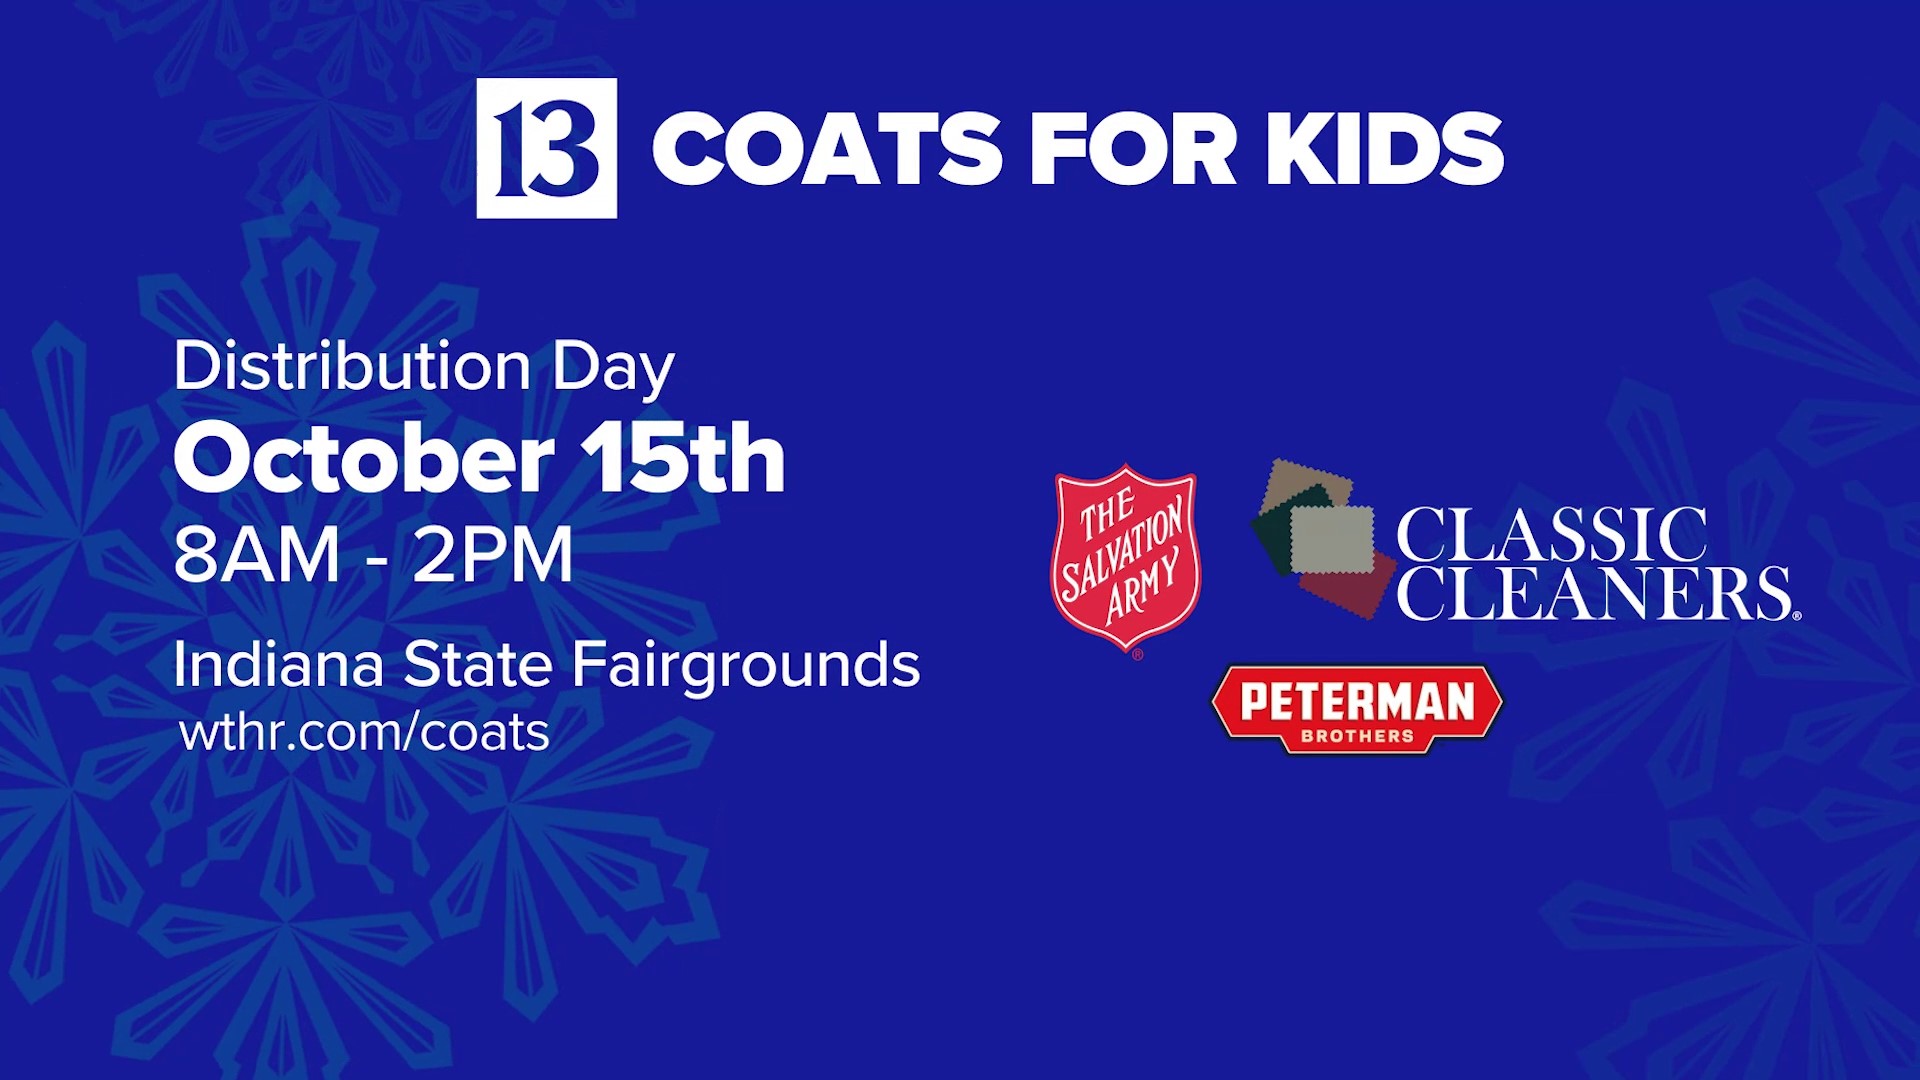 Coats for Kids distribution day is planned for Saturday, Oct. 15 at the Indiana State Fairgrounds from 8 a.m. – 2 p.m. in the Elements Financial Blue Ribbon Pavilion